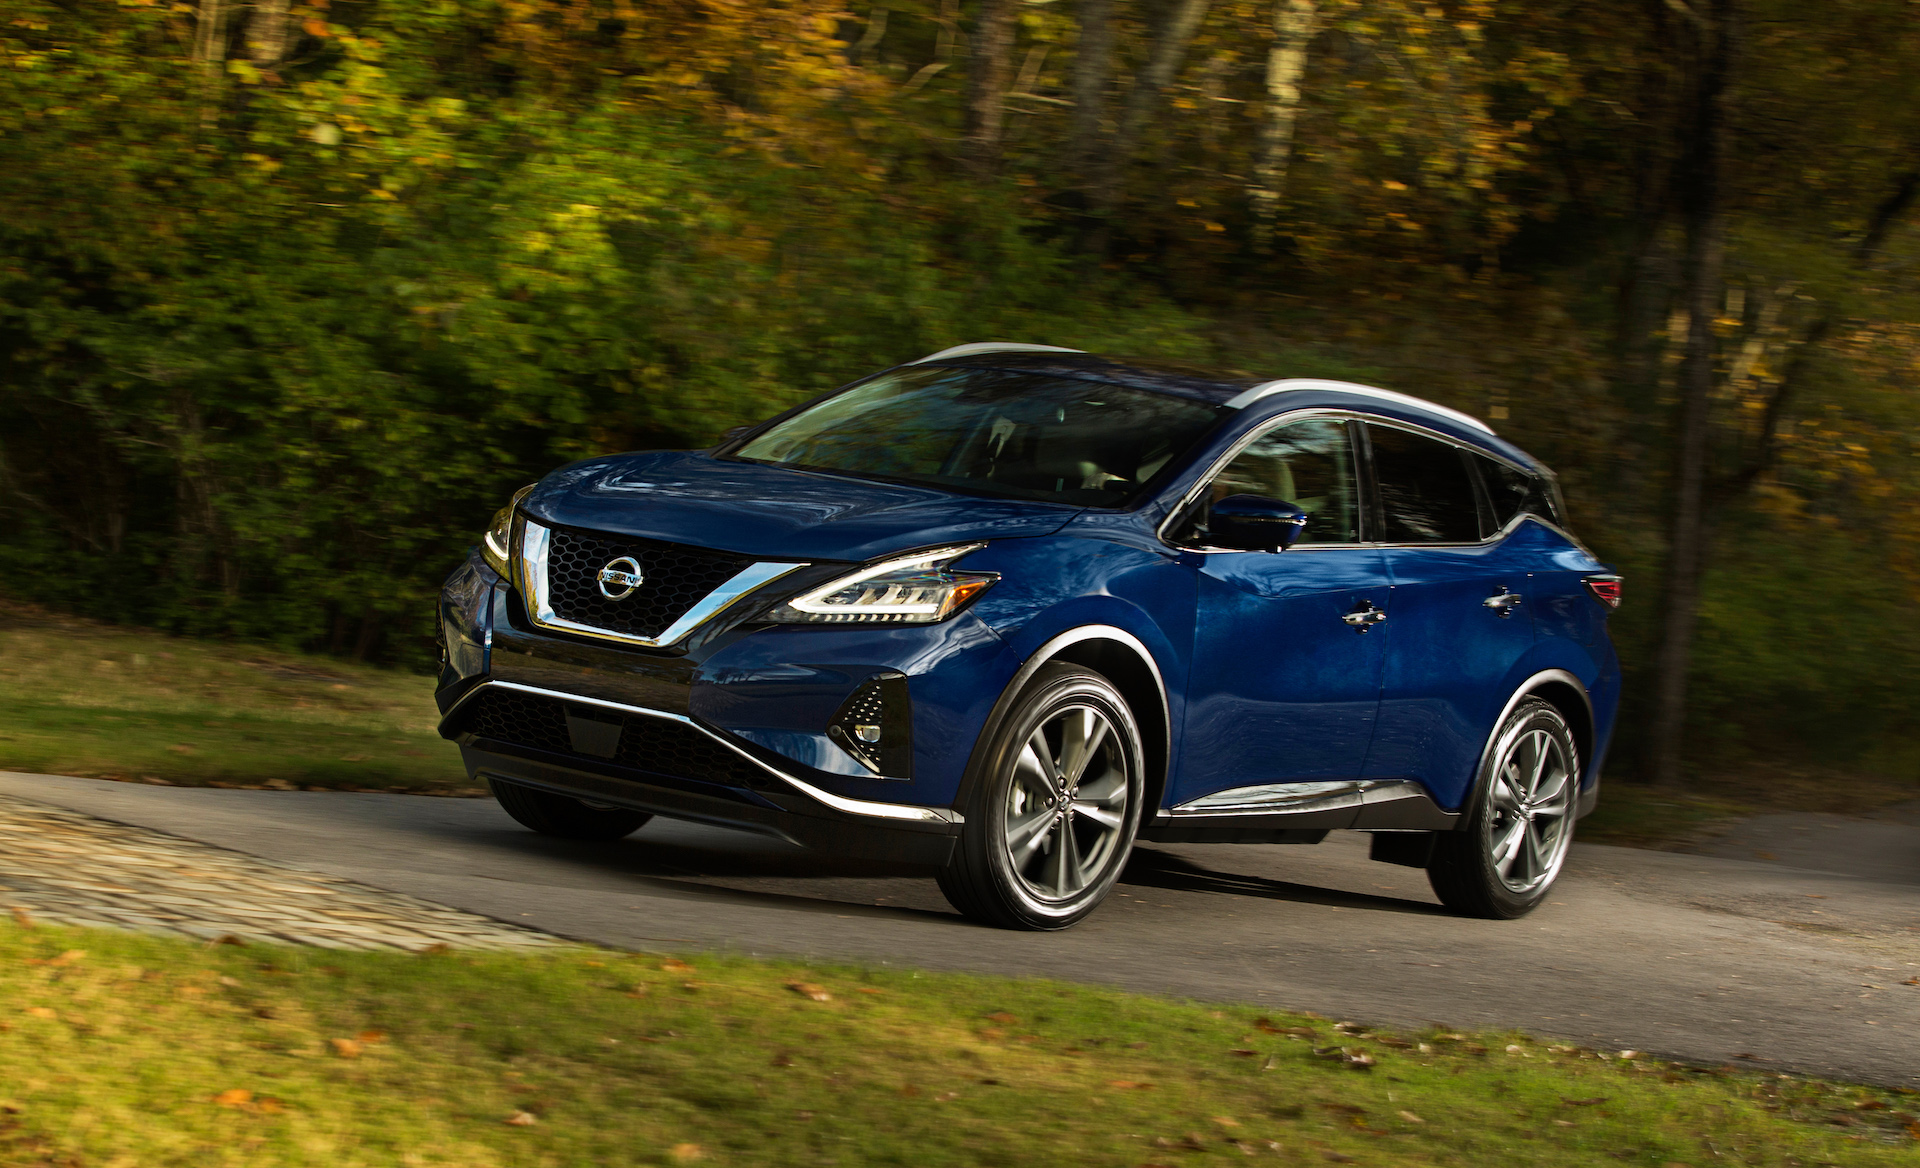 2021 Nissan Murano Upgrades To Top Safety Pick